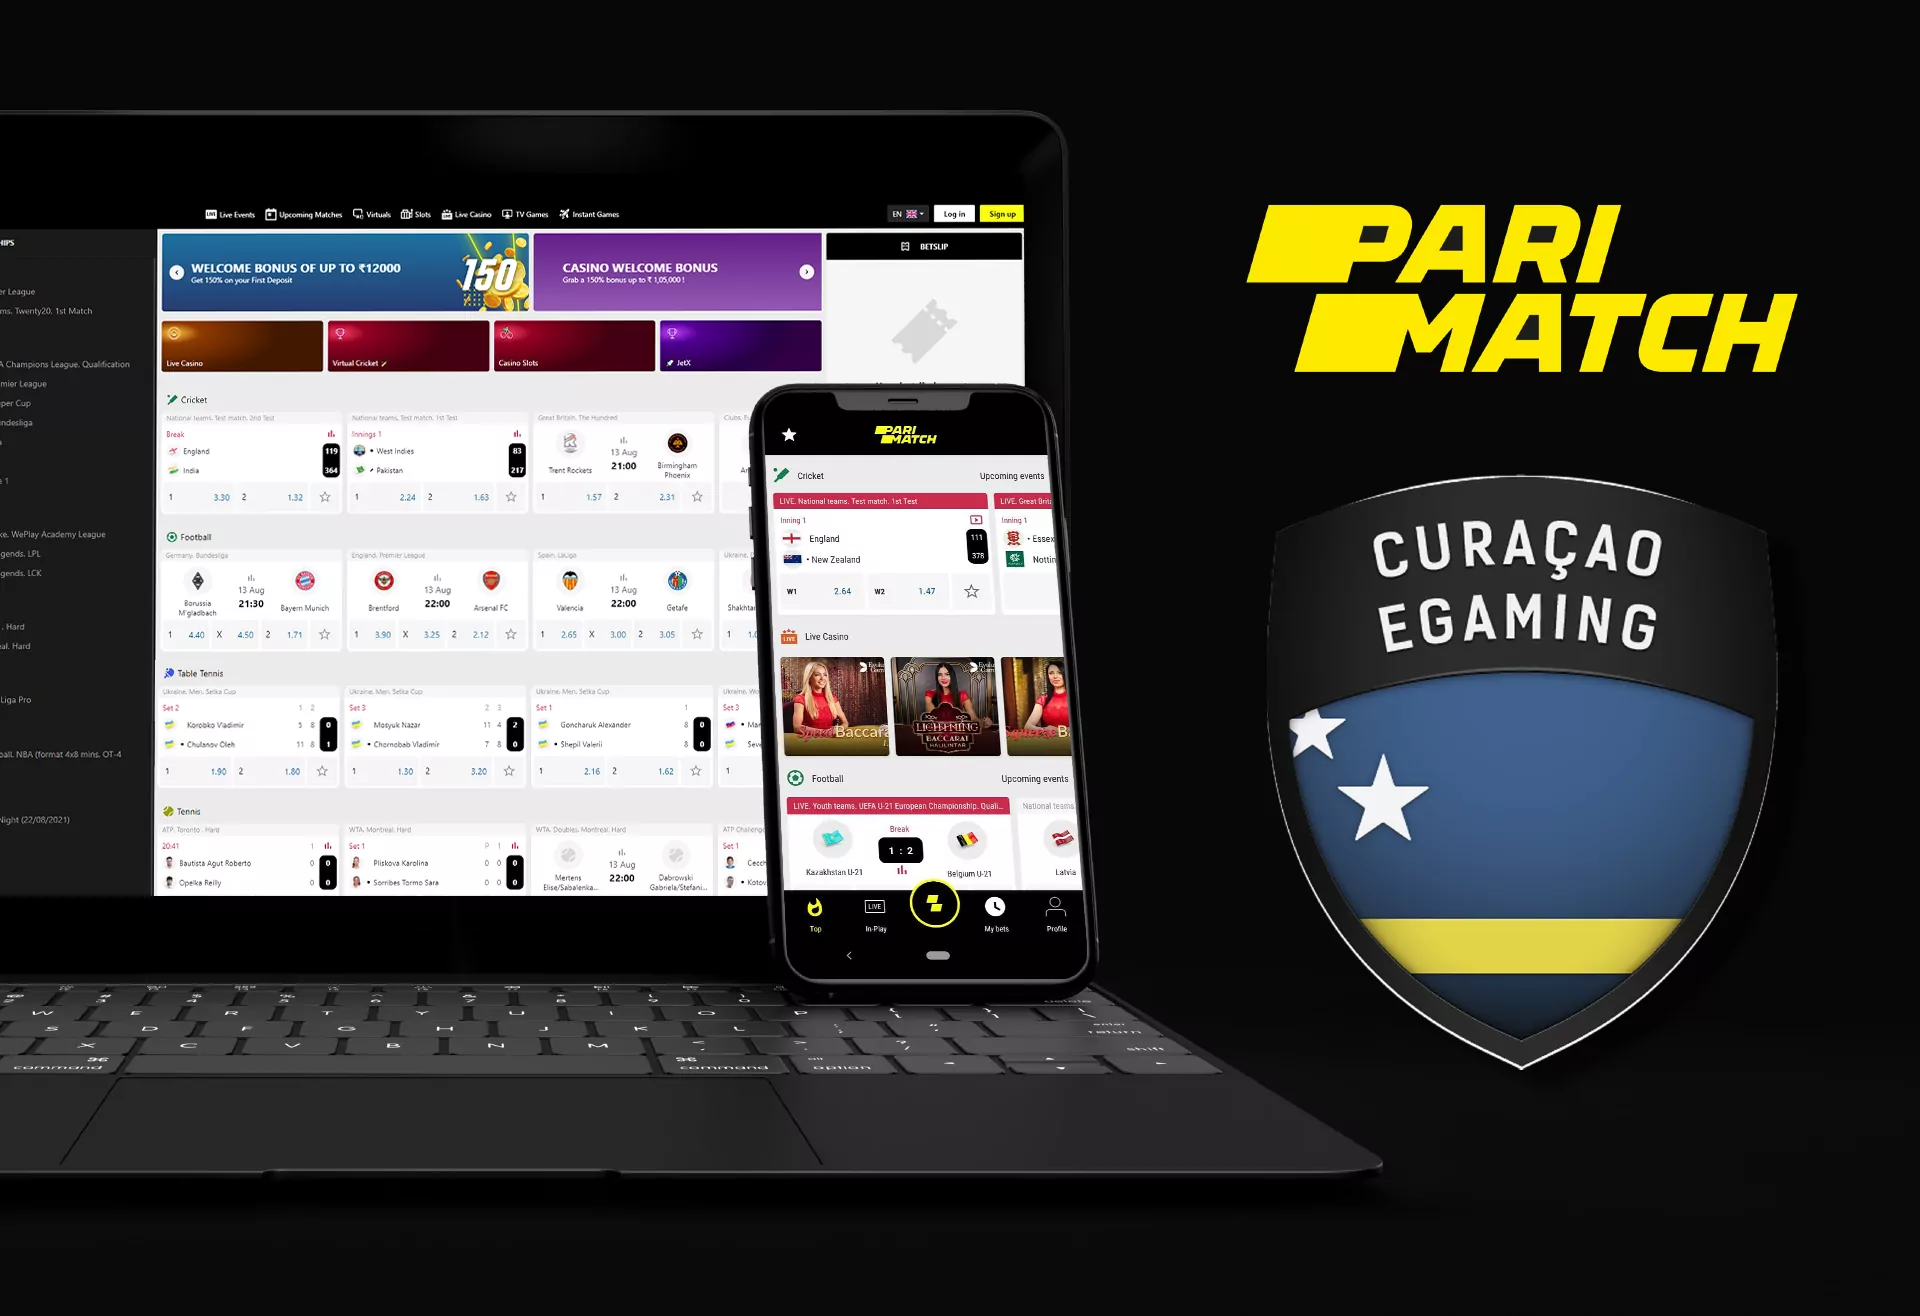 Parimatch works legally under the Curacao license, so it is safe for users to place bets here.